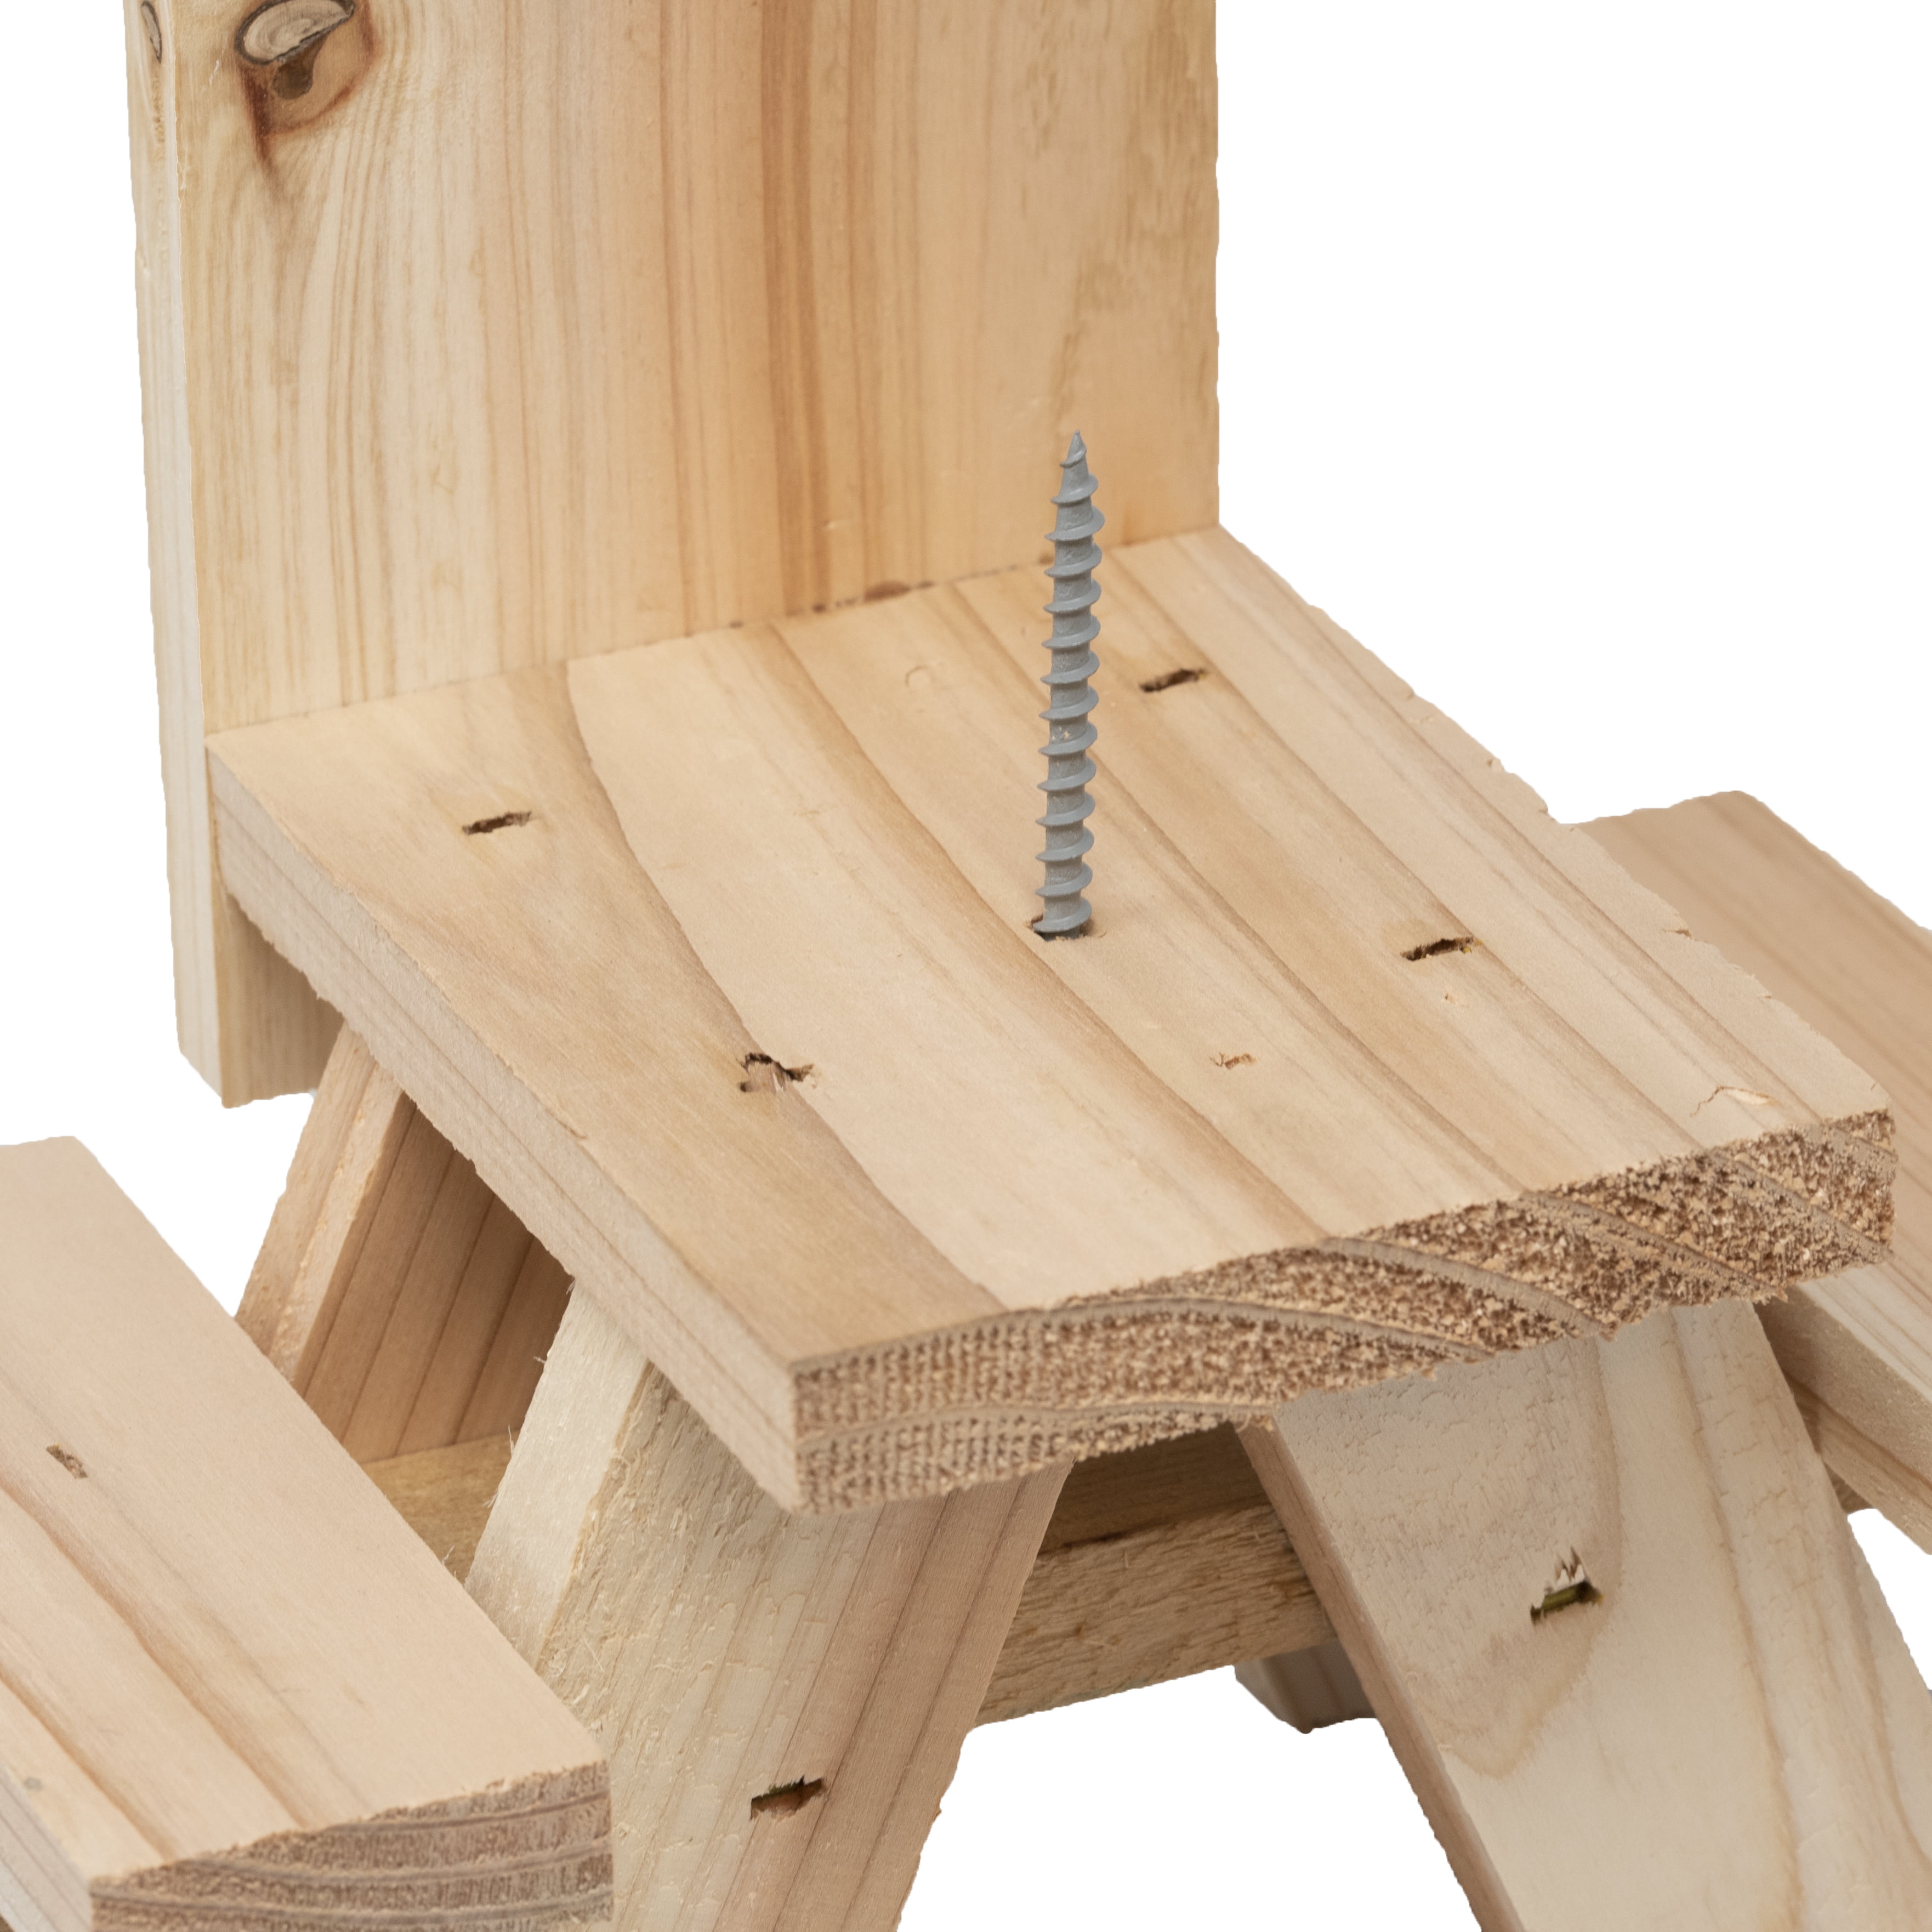 Picnic Table Feeder for Squirrels with Corn Holder American Heritage Industries Squirrel Picnic Table 